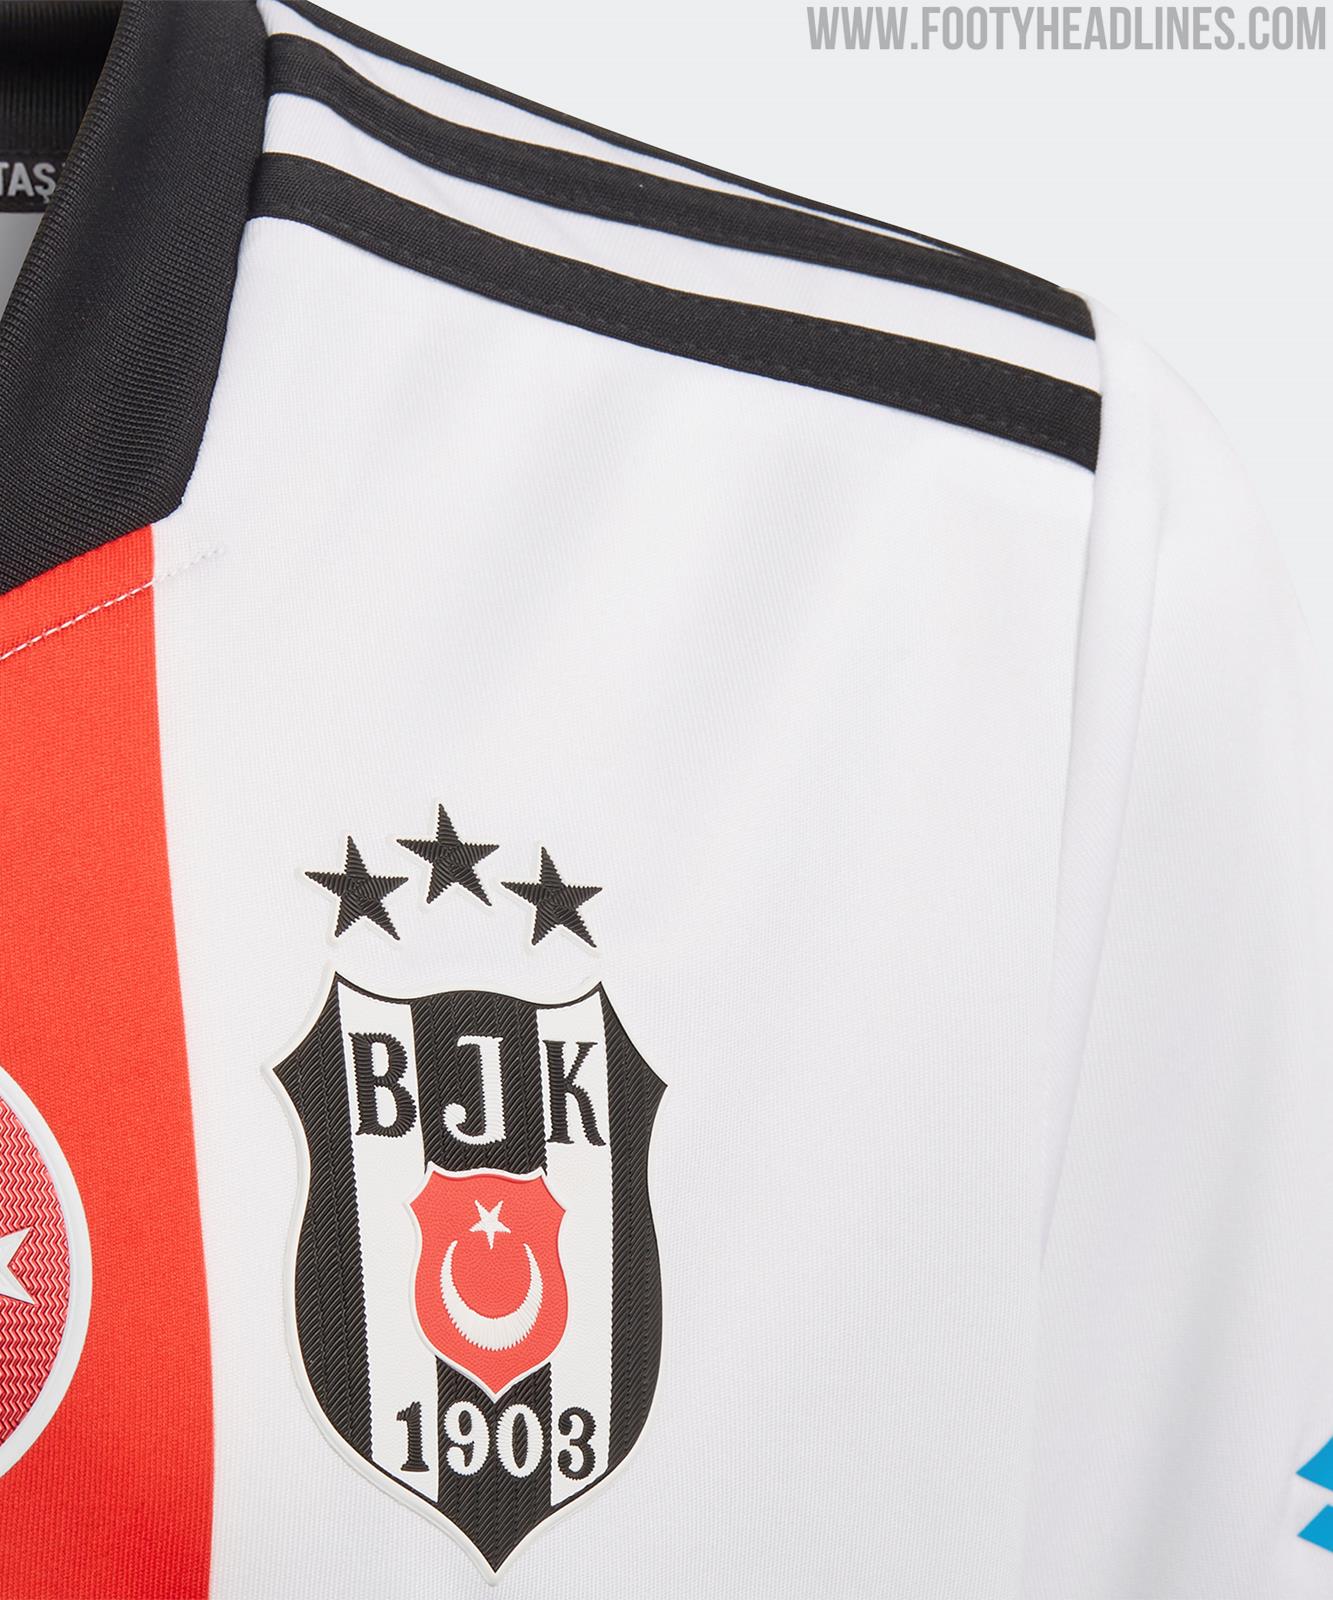 Beşiktaş's 2021/21 away kit will allegedly feature a 'eagle feather'  pattern on the front. : r/besiktas